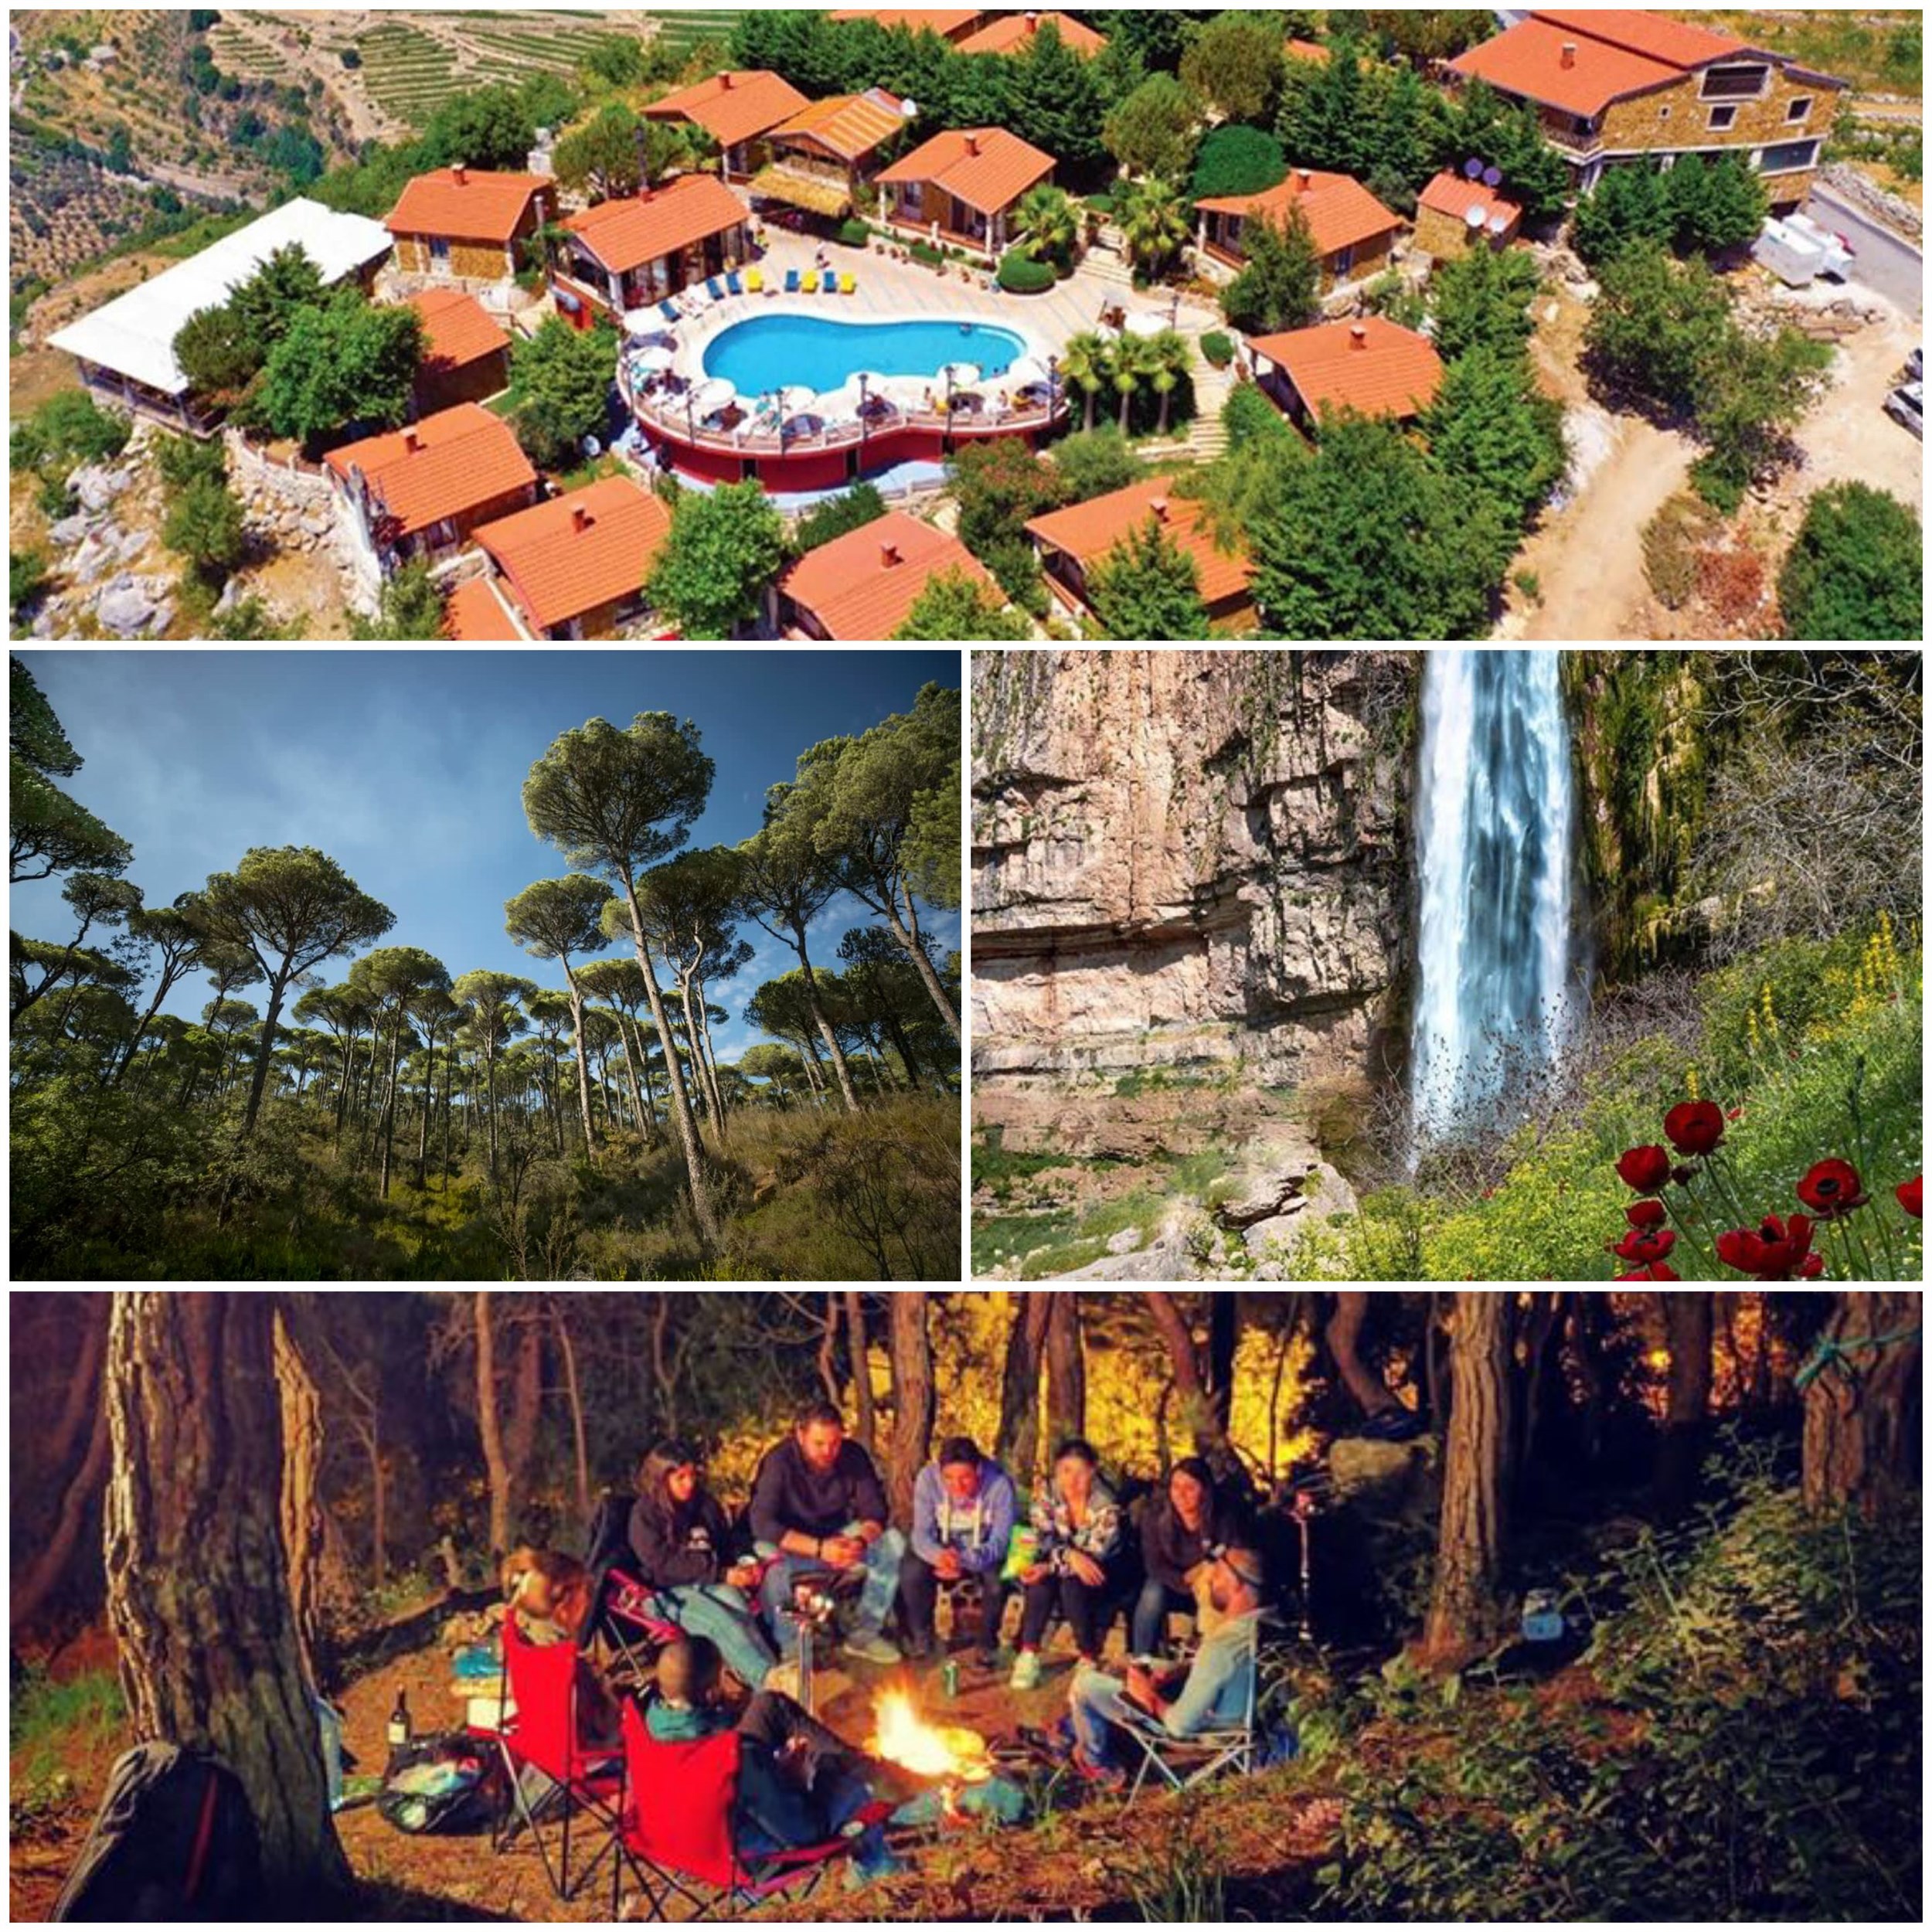 <p>ESCAPE THE BUSTLE OF THE CITY &amp; RELAX AT L'ETOILE DU LOUP RESORT </p>
<p>IN JEZZINE, SOUTH OF LEBANON </p>
<p> </p>